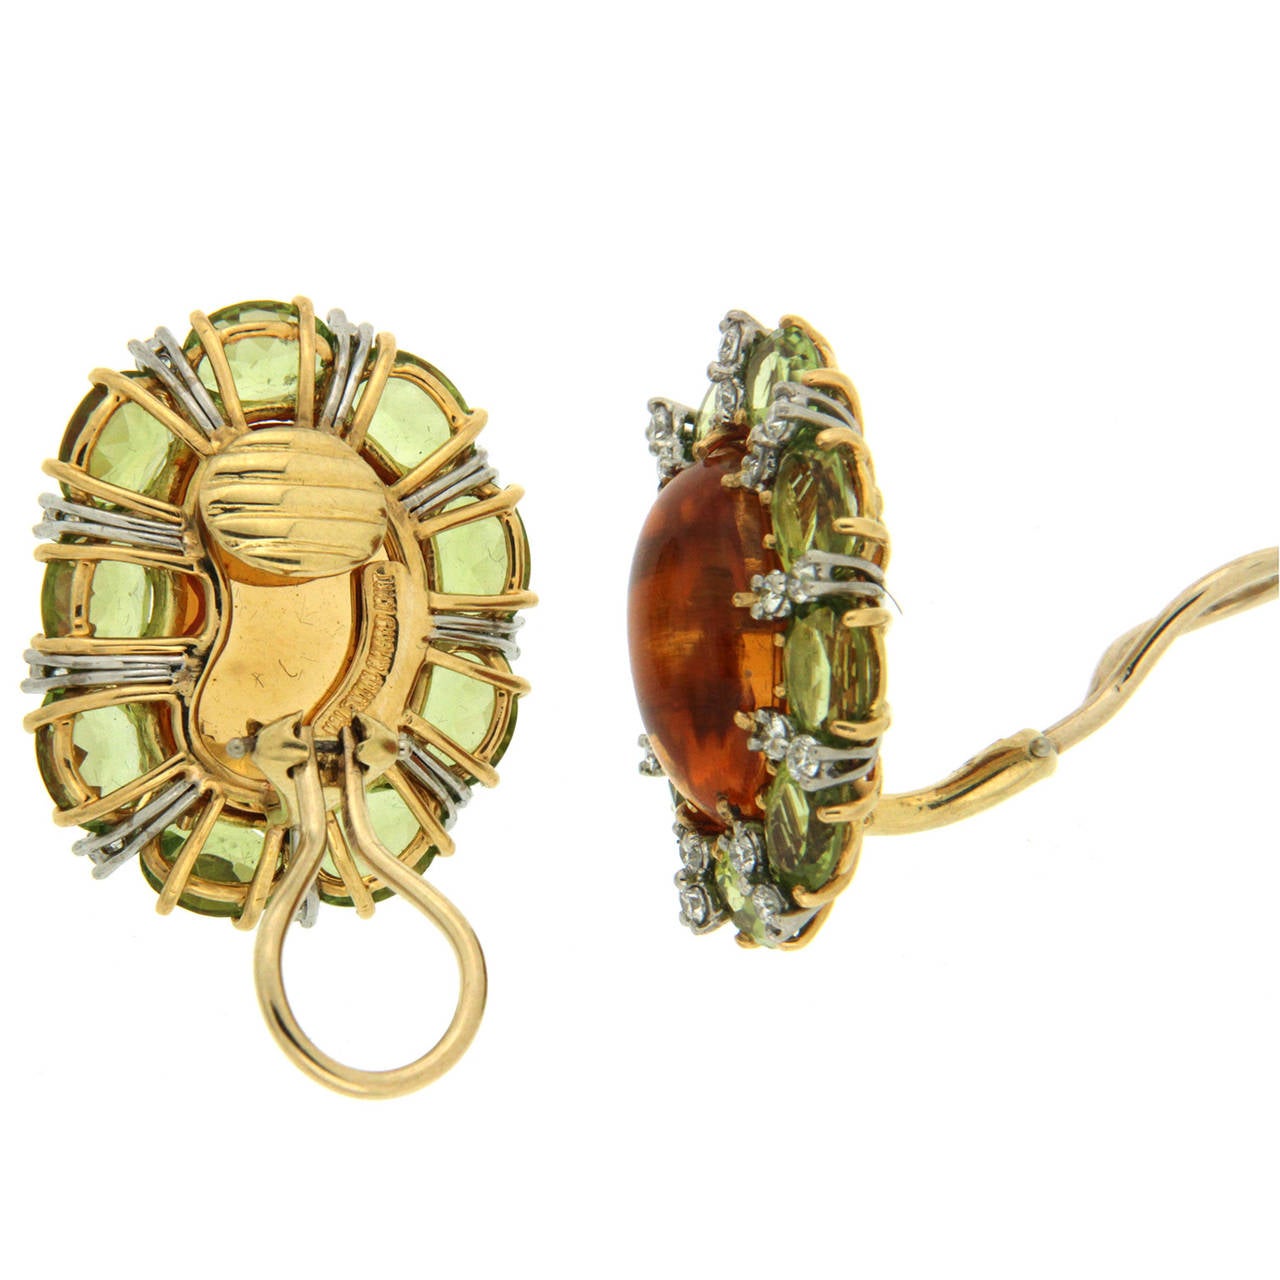 Colori Kidney Earrings with a smooth bean shape Madeira Citrine center and oval peridot surrounding stones with small round brilliant diamond accent in 18kt yellow gold. The earrings are complete with clip backs. 